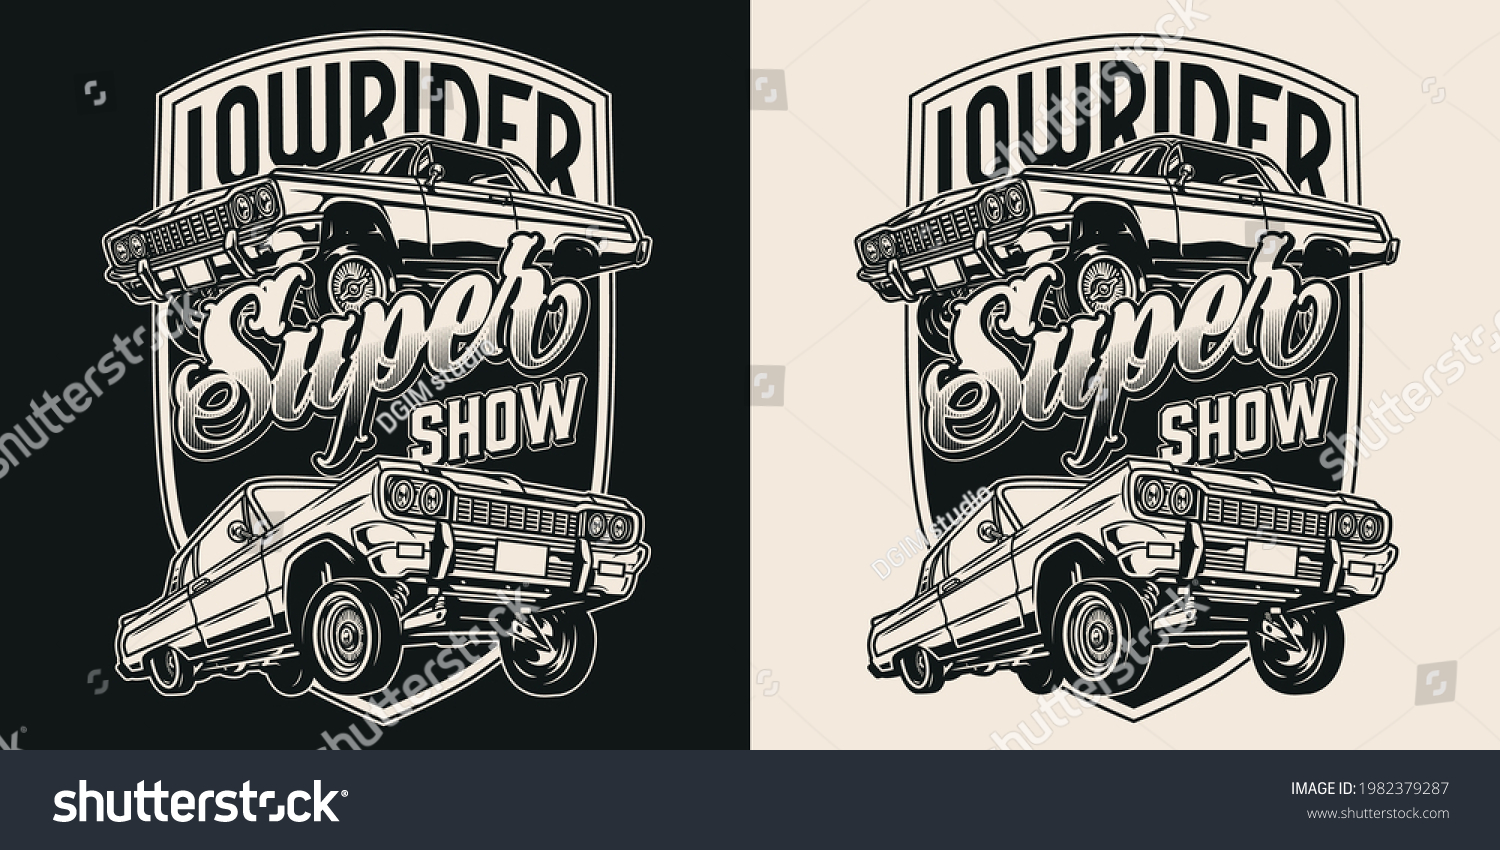 SVG of Cruising super show vintage monochrome logo with american lowrider cars isolated vector illustration svg